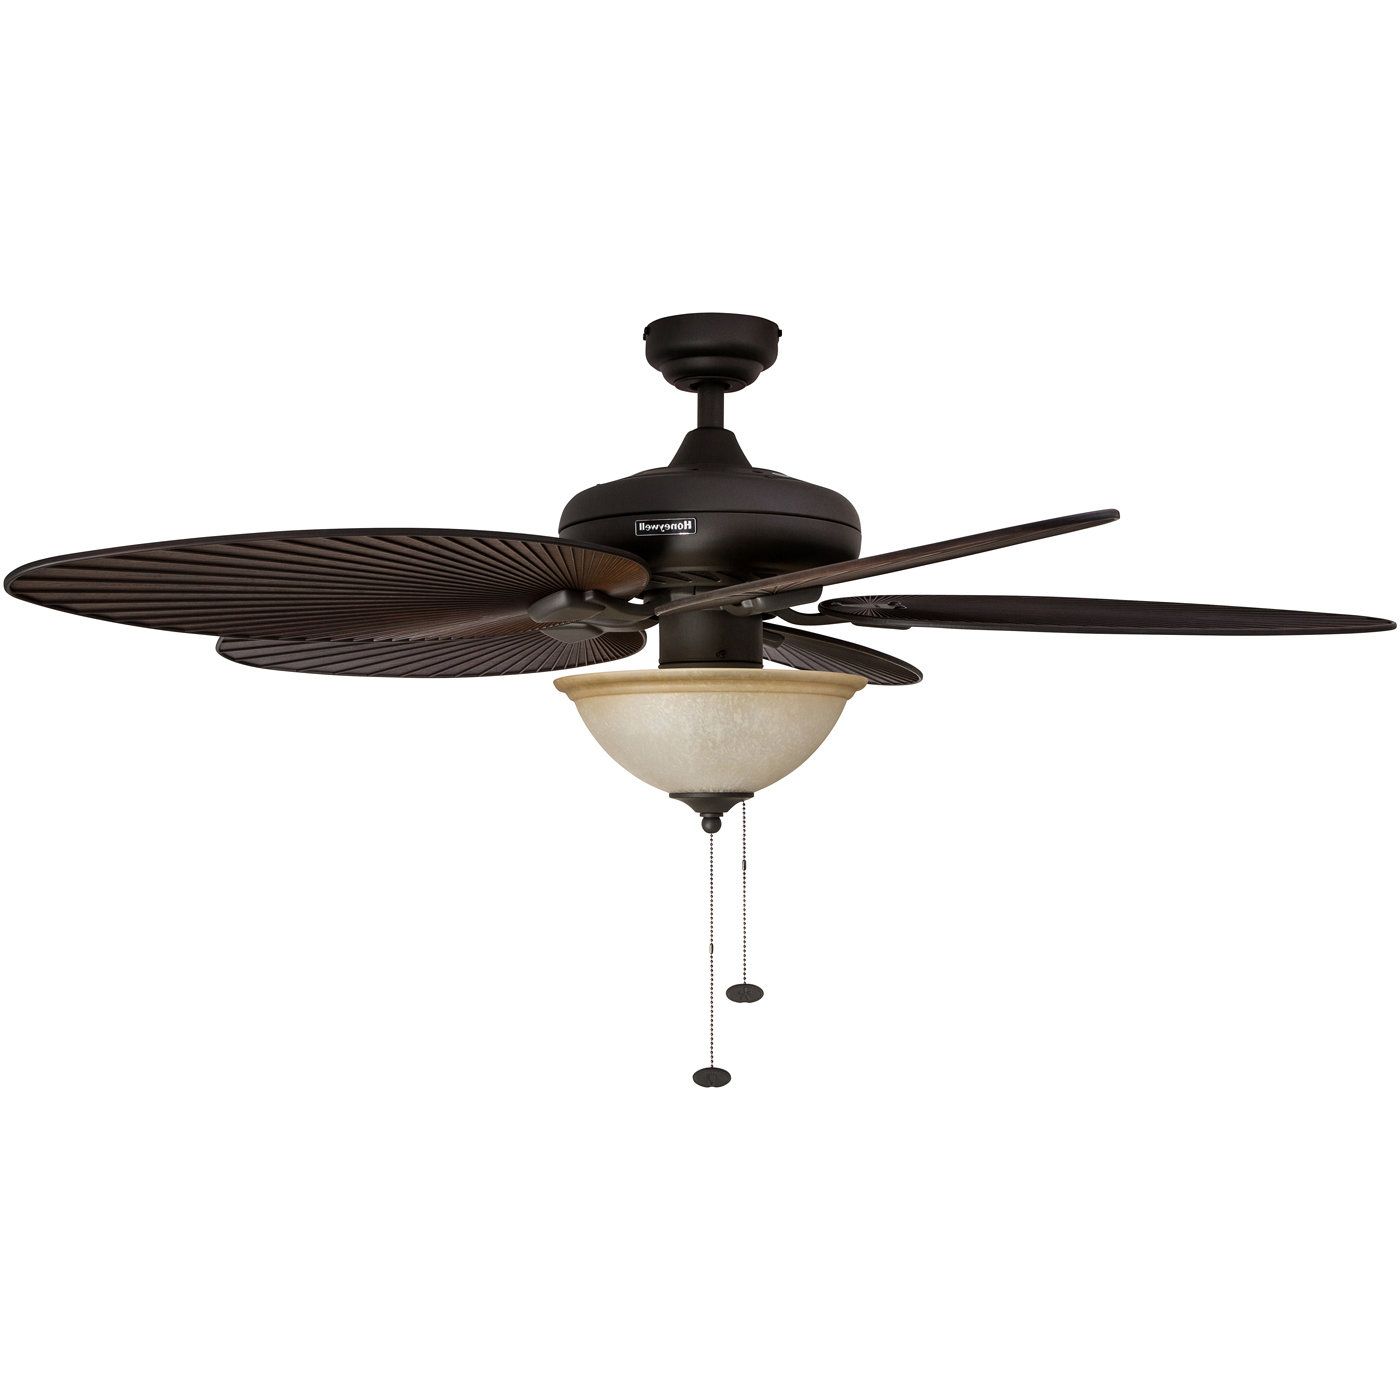 Auden 5 Blade Led Ceiling Fans Inside Fashionable Bay Isle Home 52" Mccarthy 5 Blade Ceiling Fan With Light (View 9 of 20)